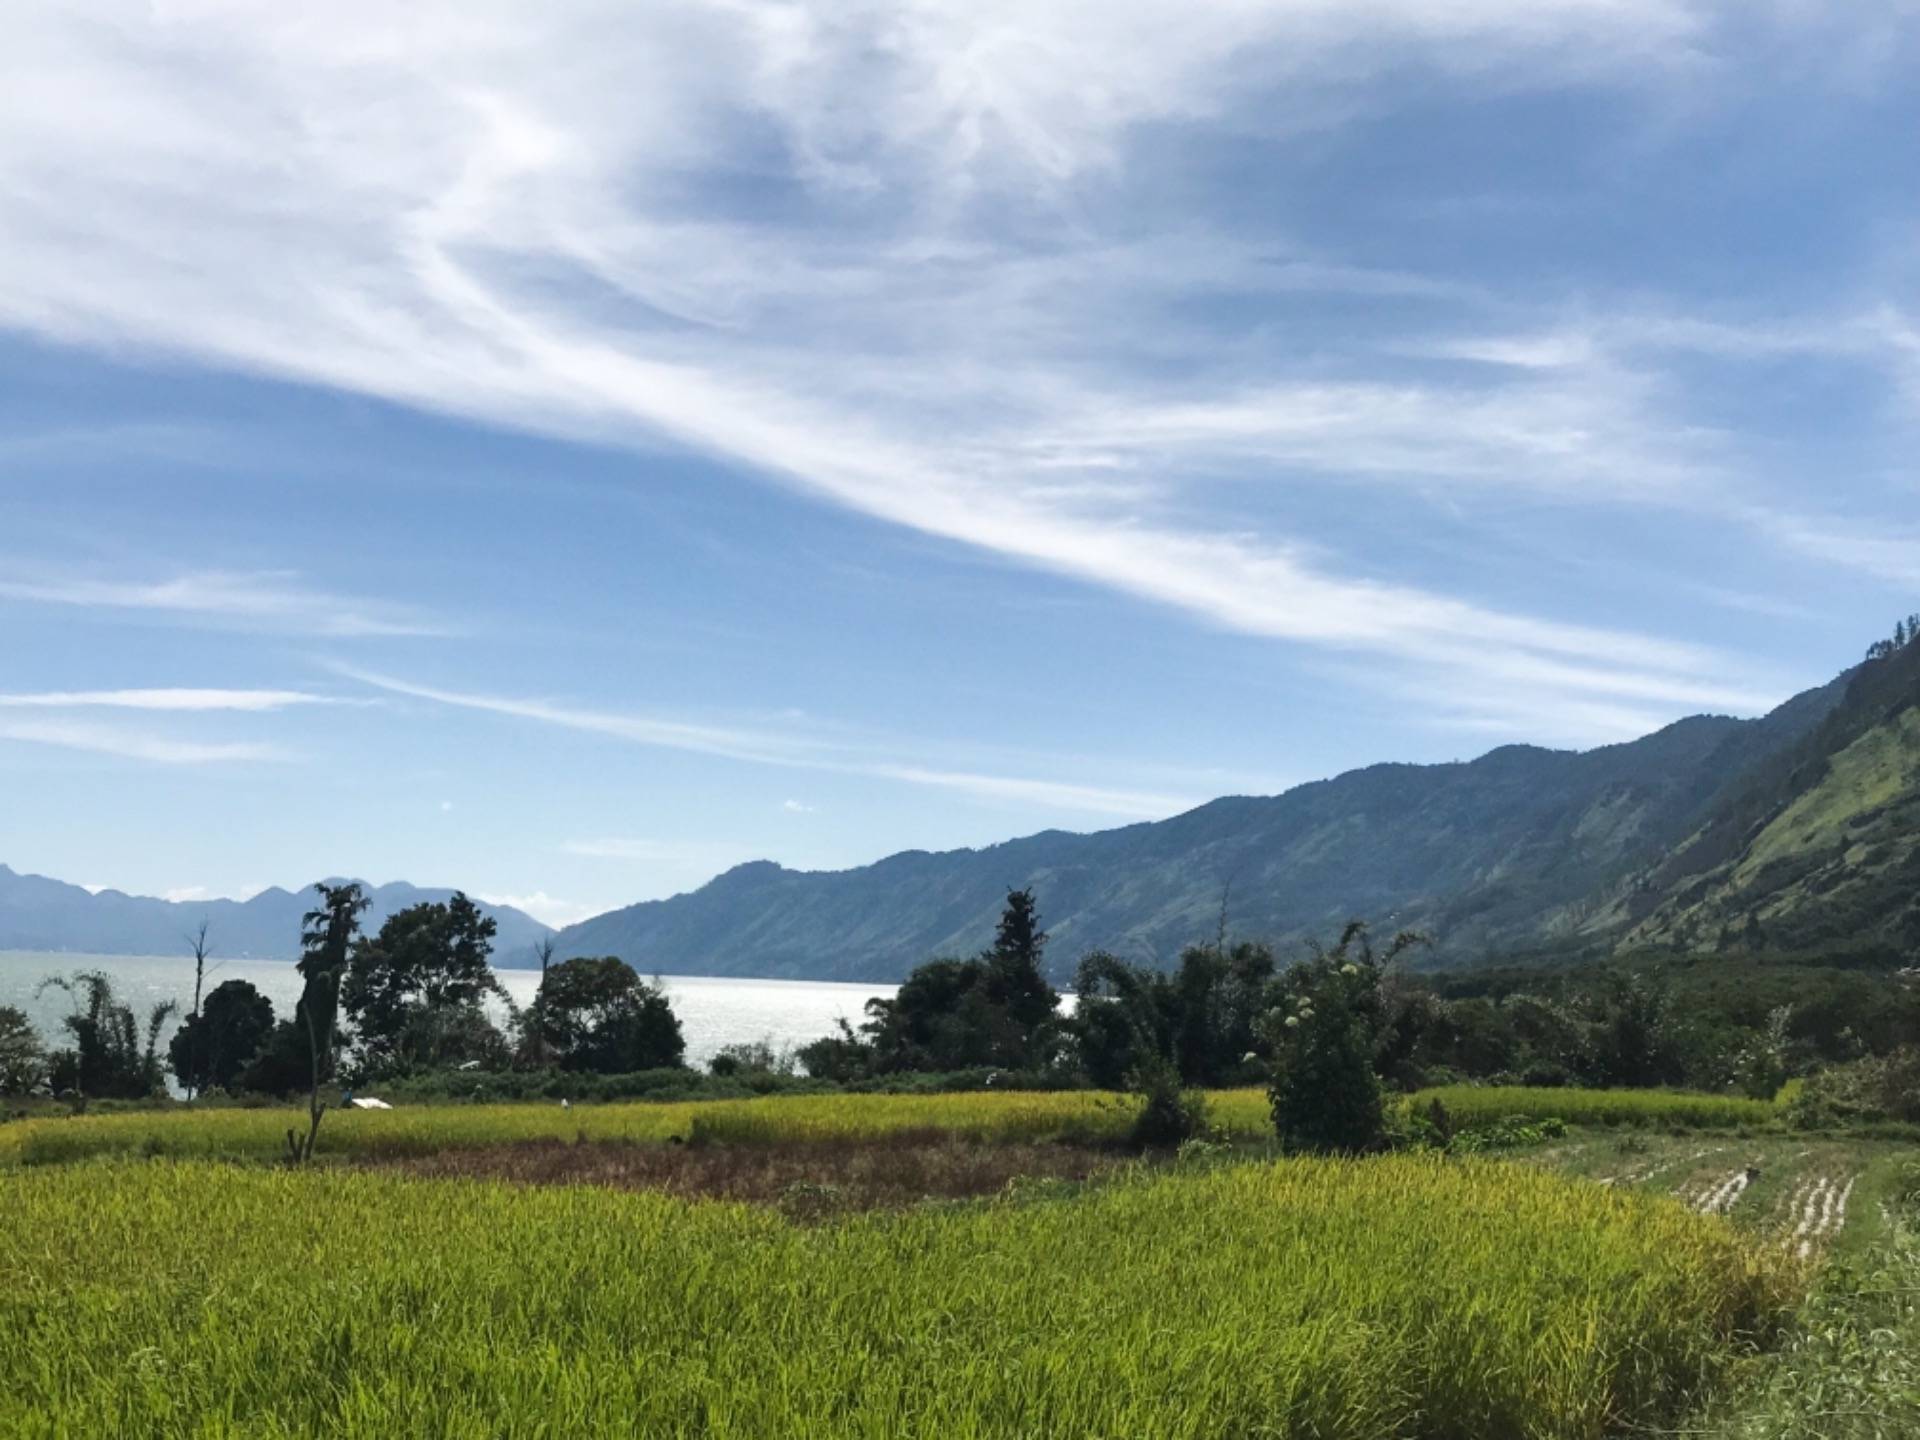 The Lake and The Rice Field